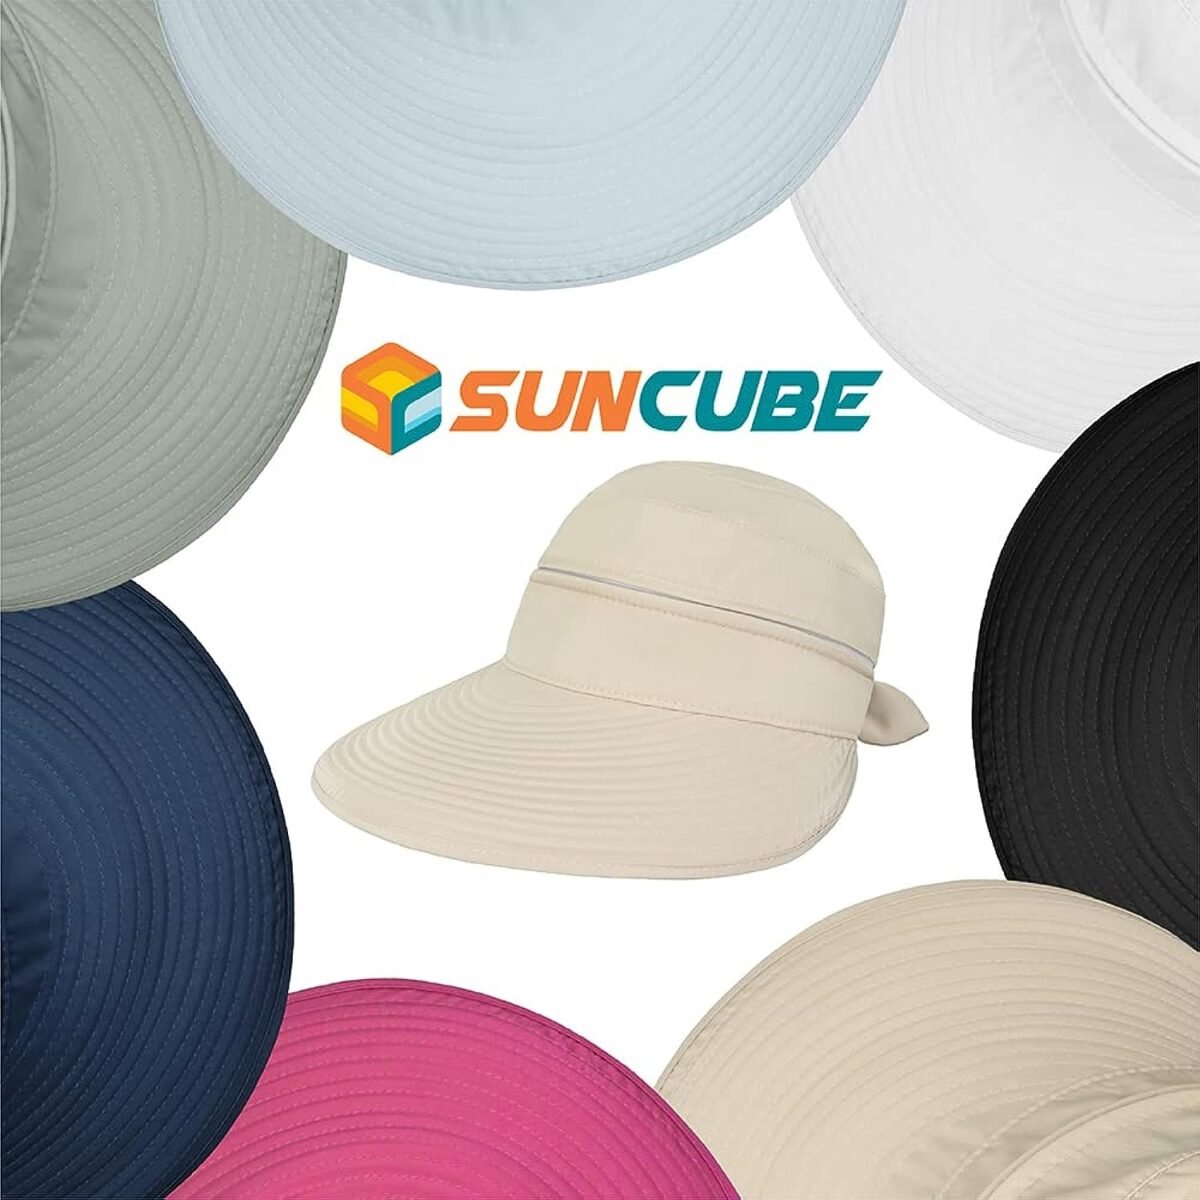 Reviewing 5 Women’s Sun Hats: Comparing Protection & Style